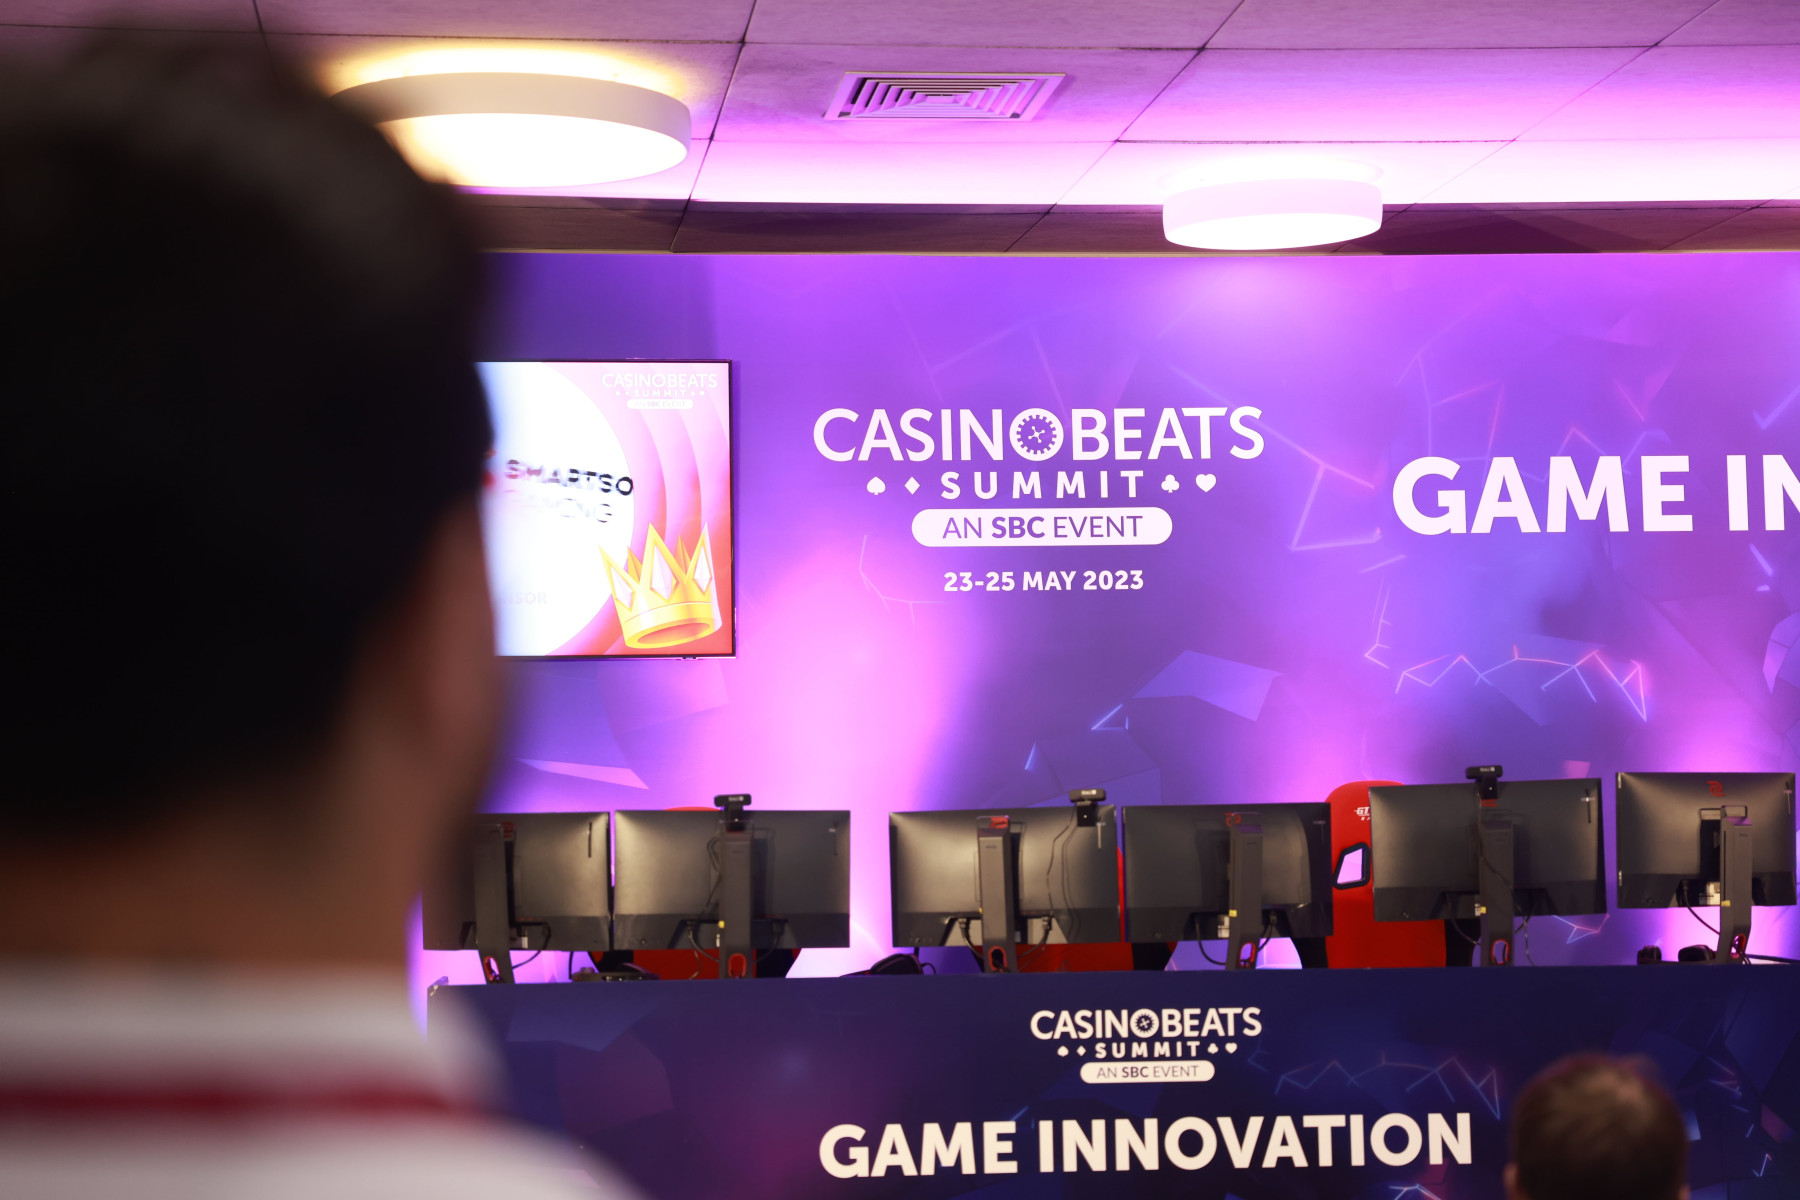 Incorporating valuable takeaways from various game studios that showcased their titles in the Game Innovation Zone at the last edition of CasinoBeats Summit (2023), this blog post synthesizes useful insights and details on how next year's agenda (2024) is set to delve deep into the noteworthy revelations shared by these studios.